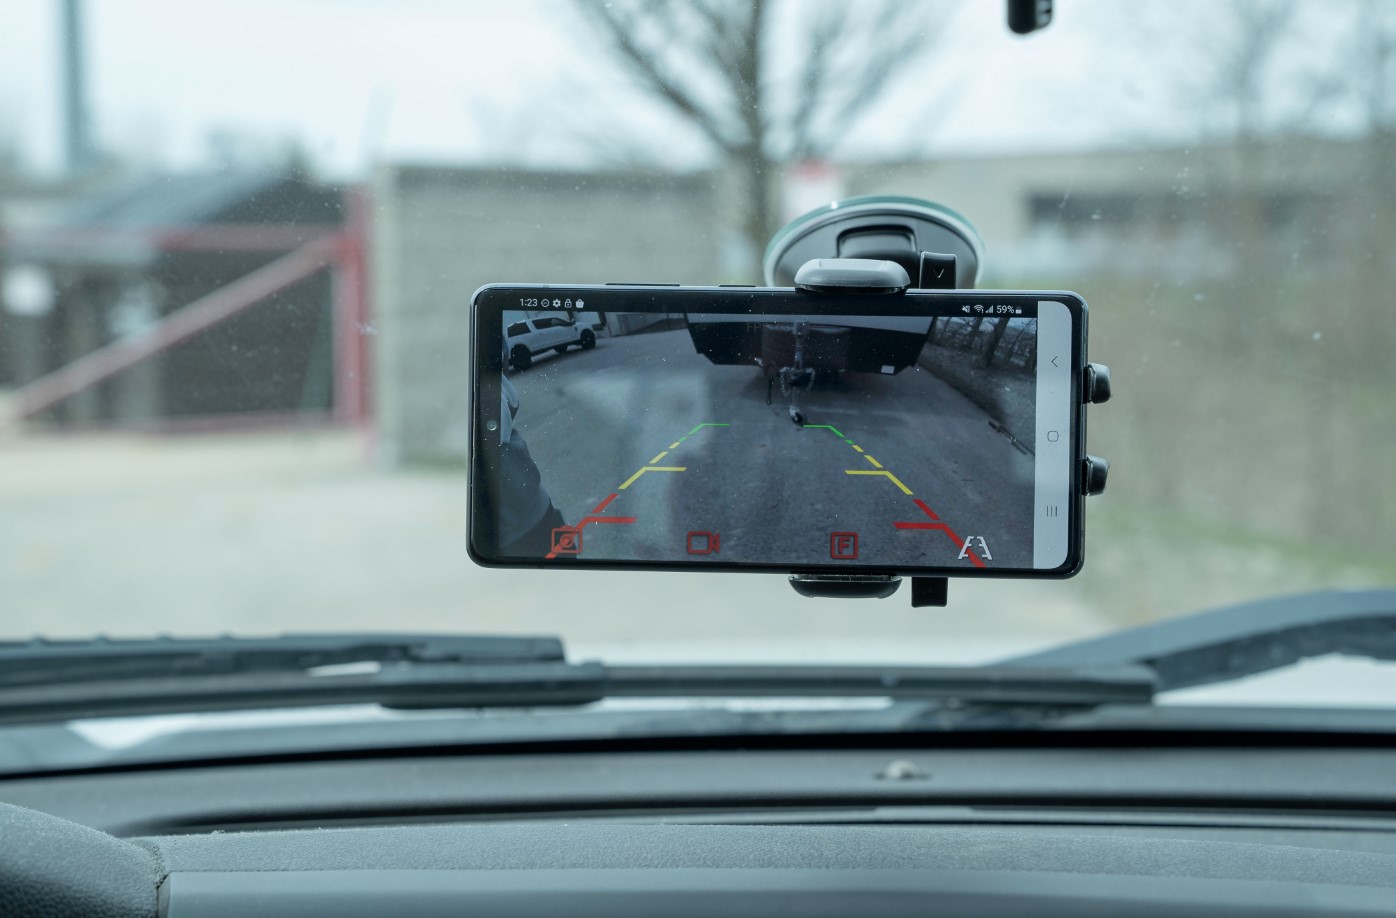 Air Lift Towtal View camera system uses your smartphone as a monitor.